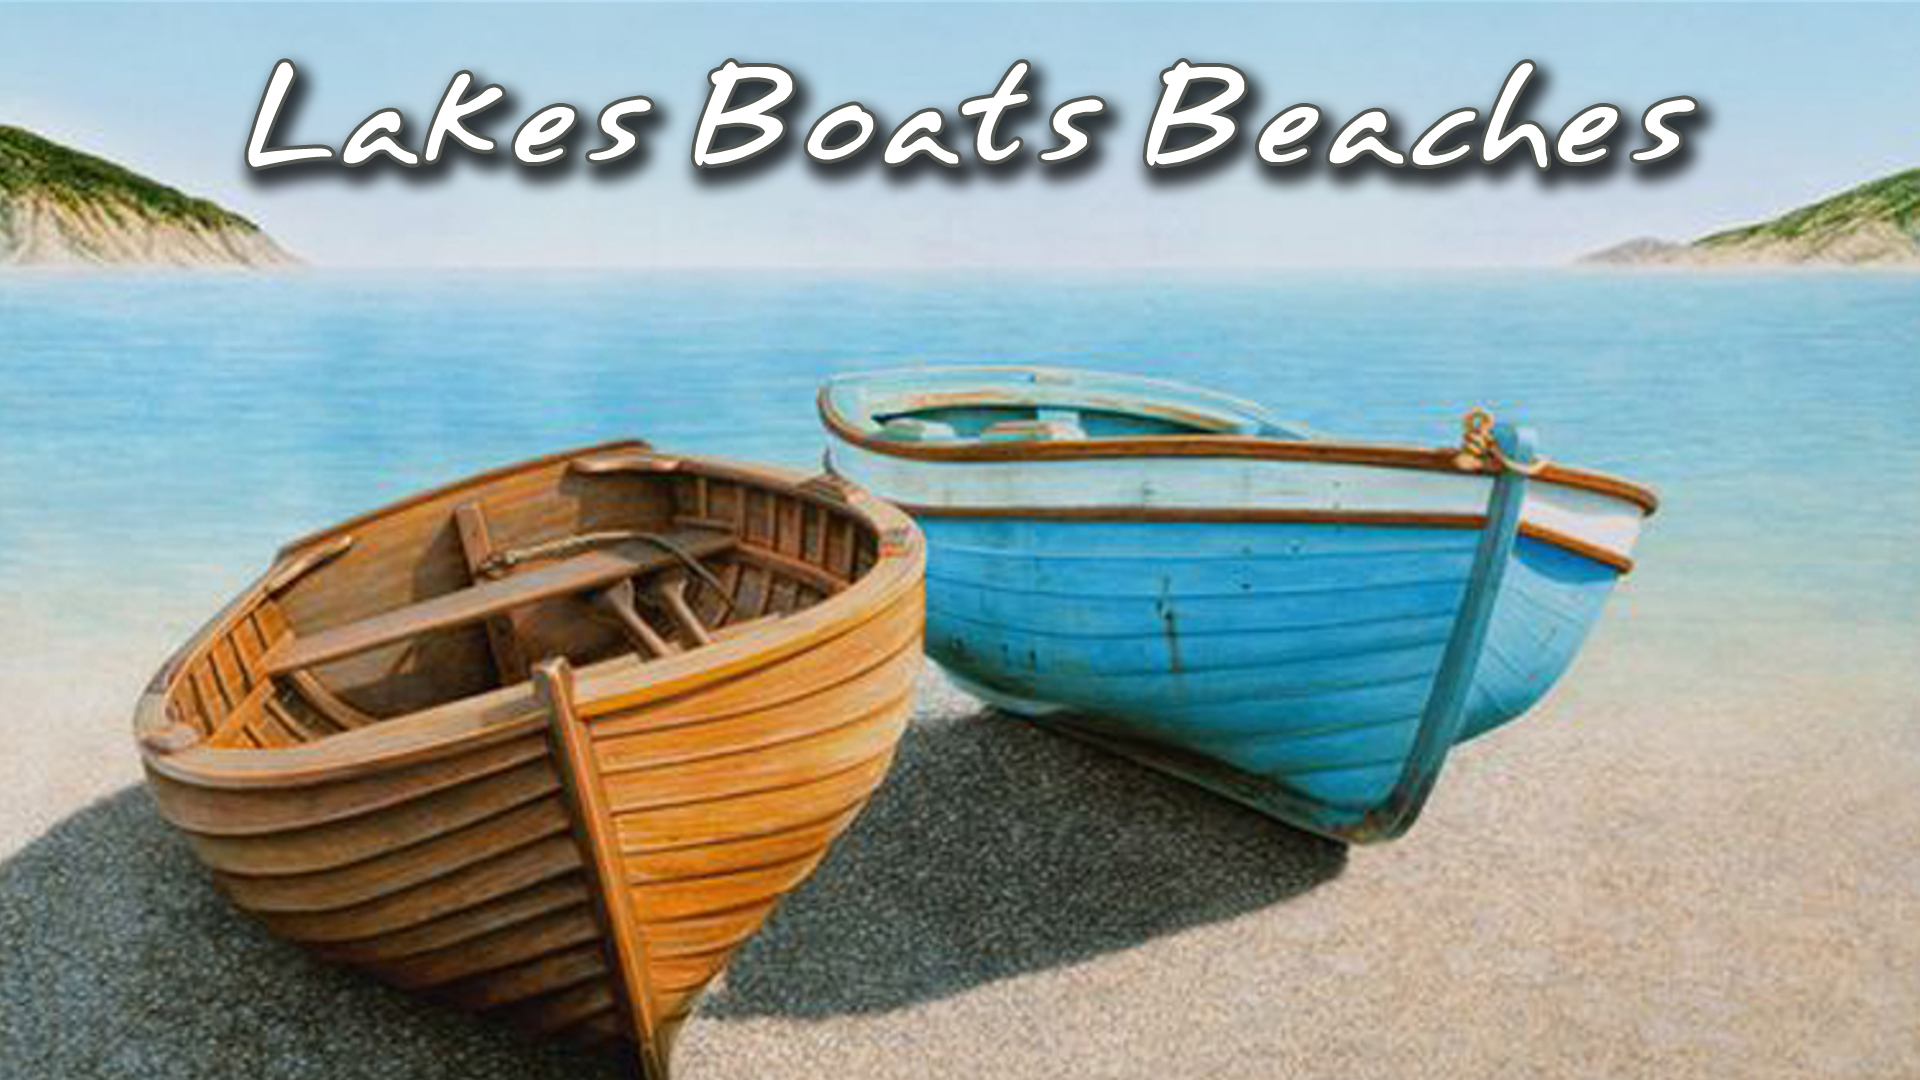 Lakes Boats Beaches – Come experience for yourself